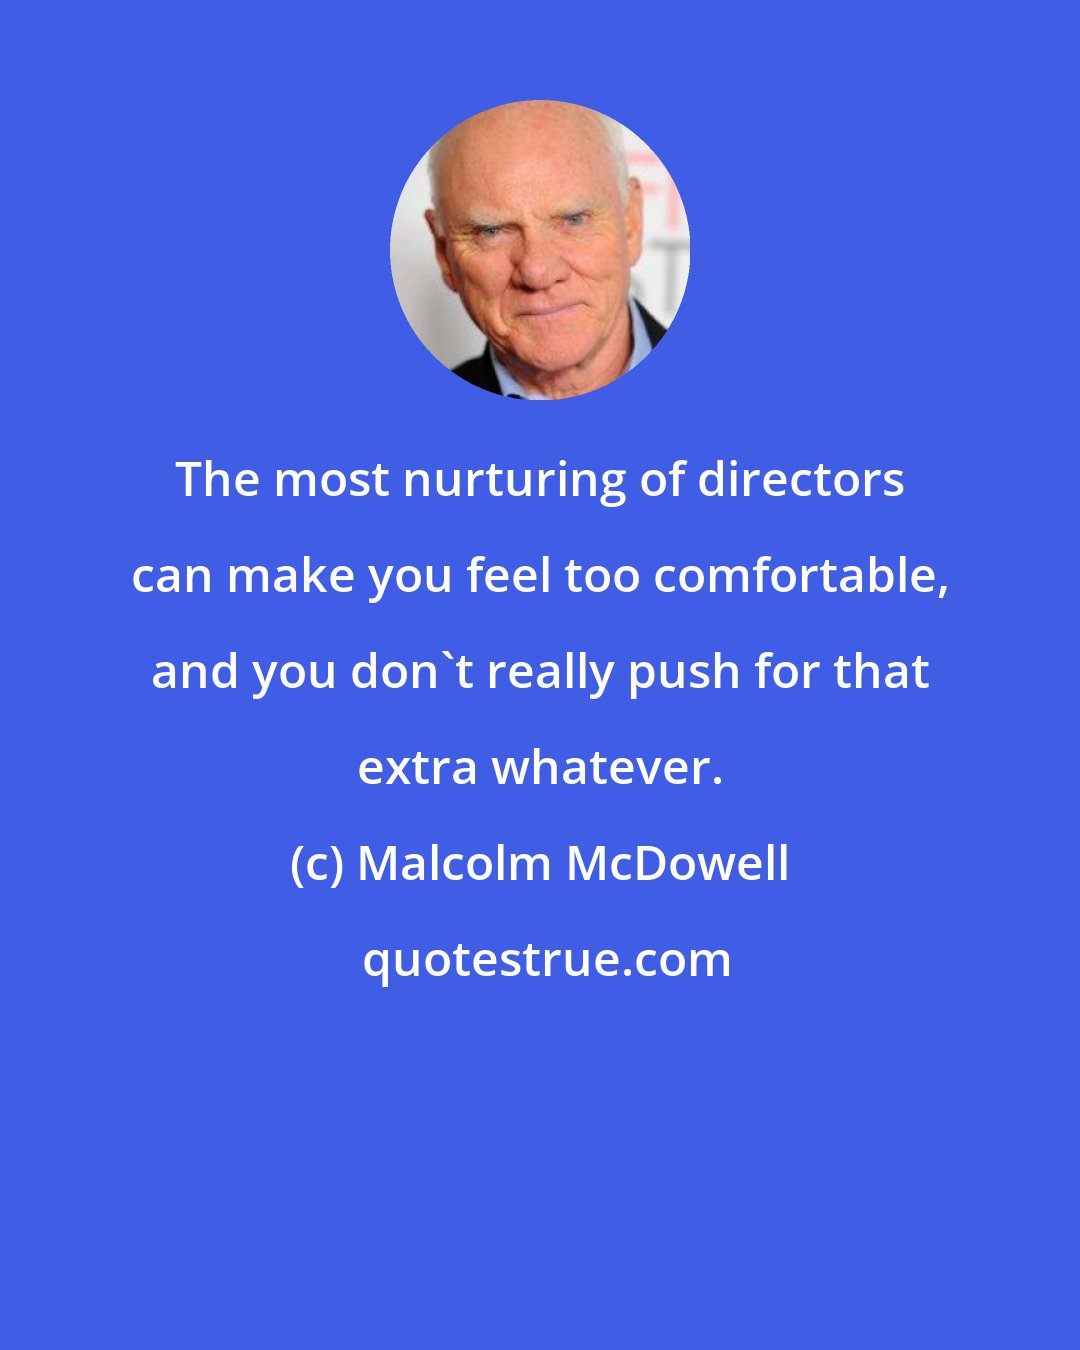 Malcolm McDowell: The most nurturing of directors can make you feel too comfortable, and you don't really push for that extra whatever.